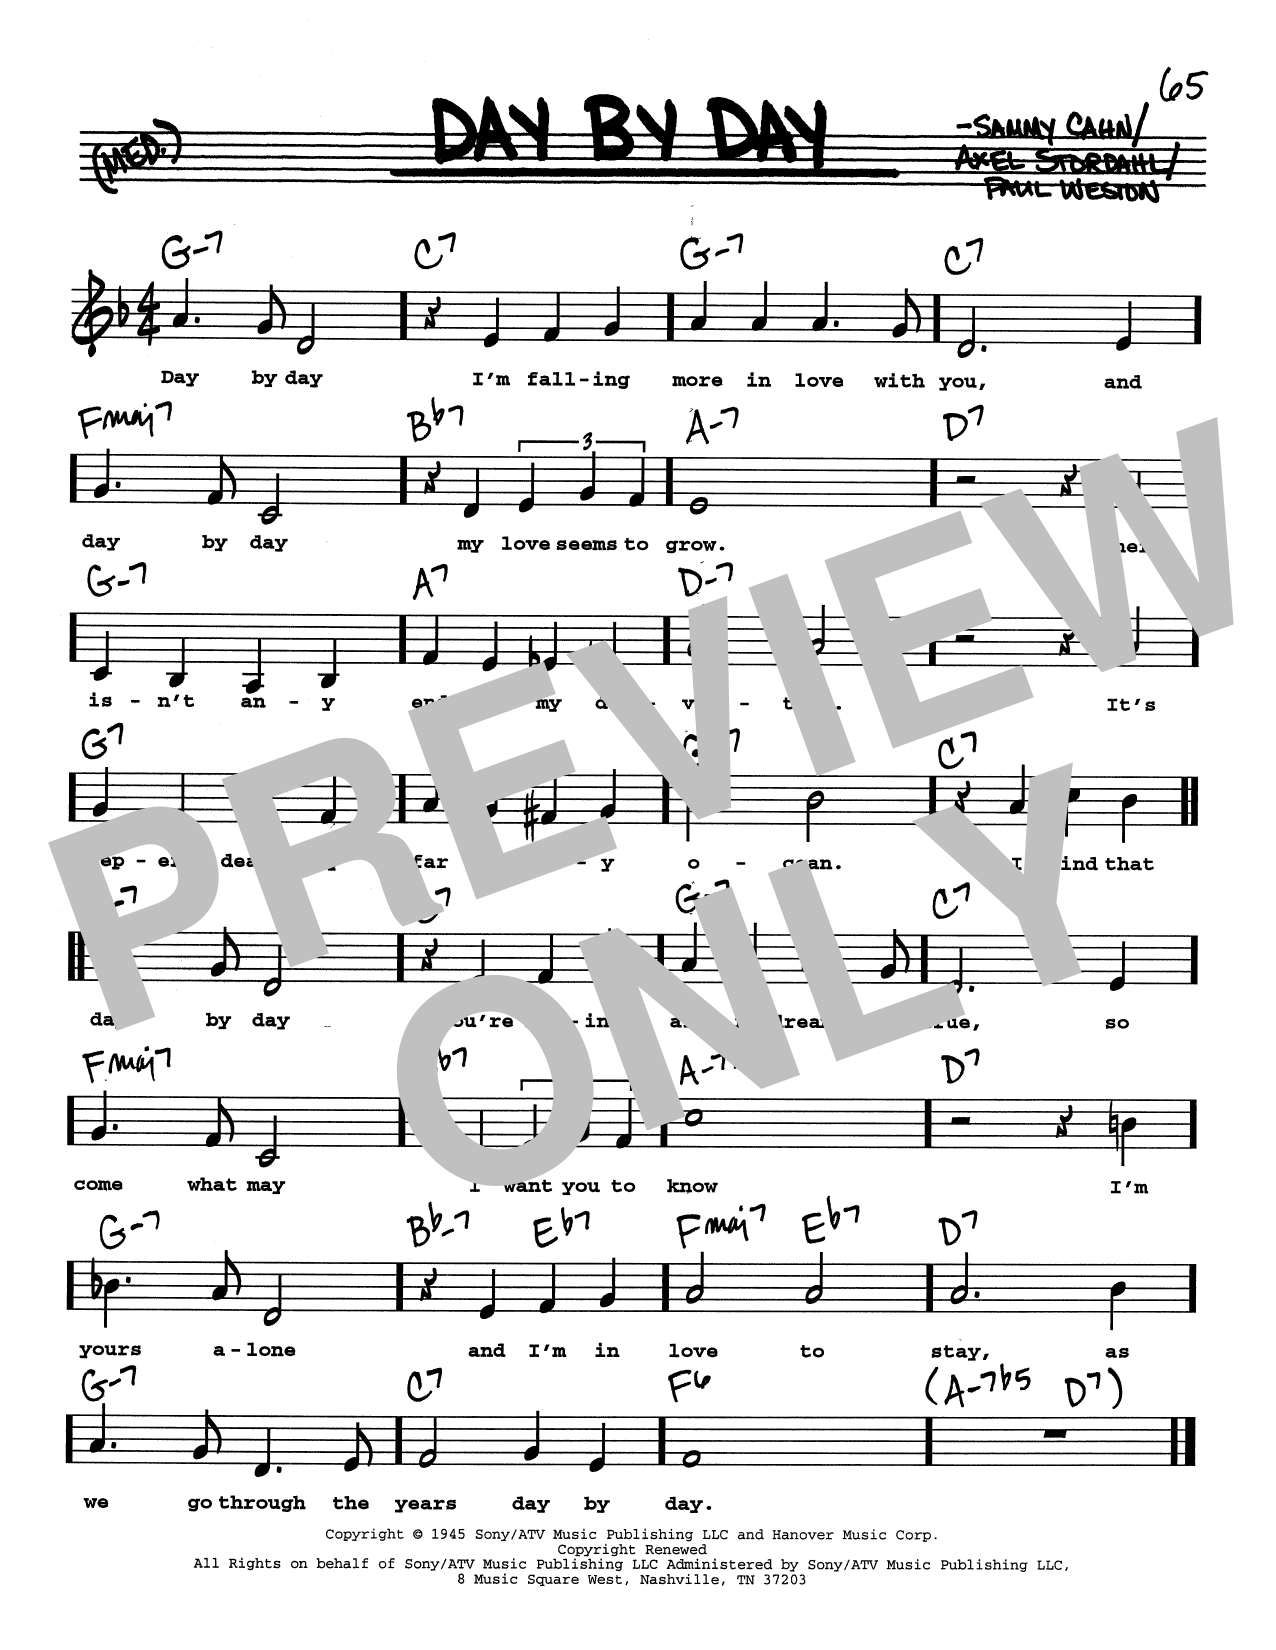 Sammy Cahn Day By Day (Low Voice) sheet music notes printable PDF score